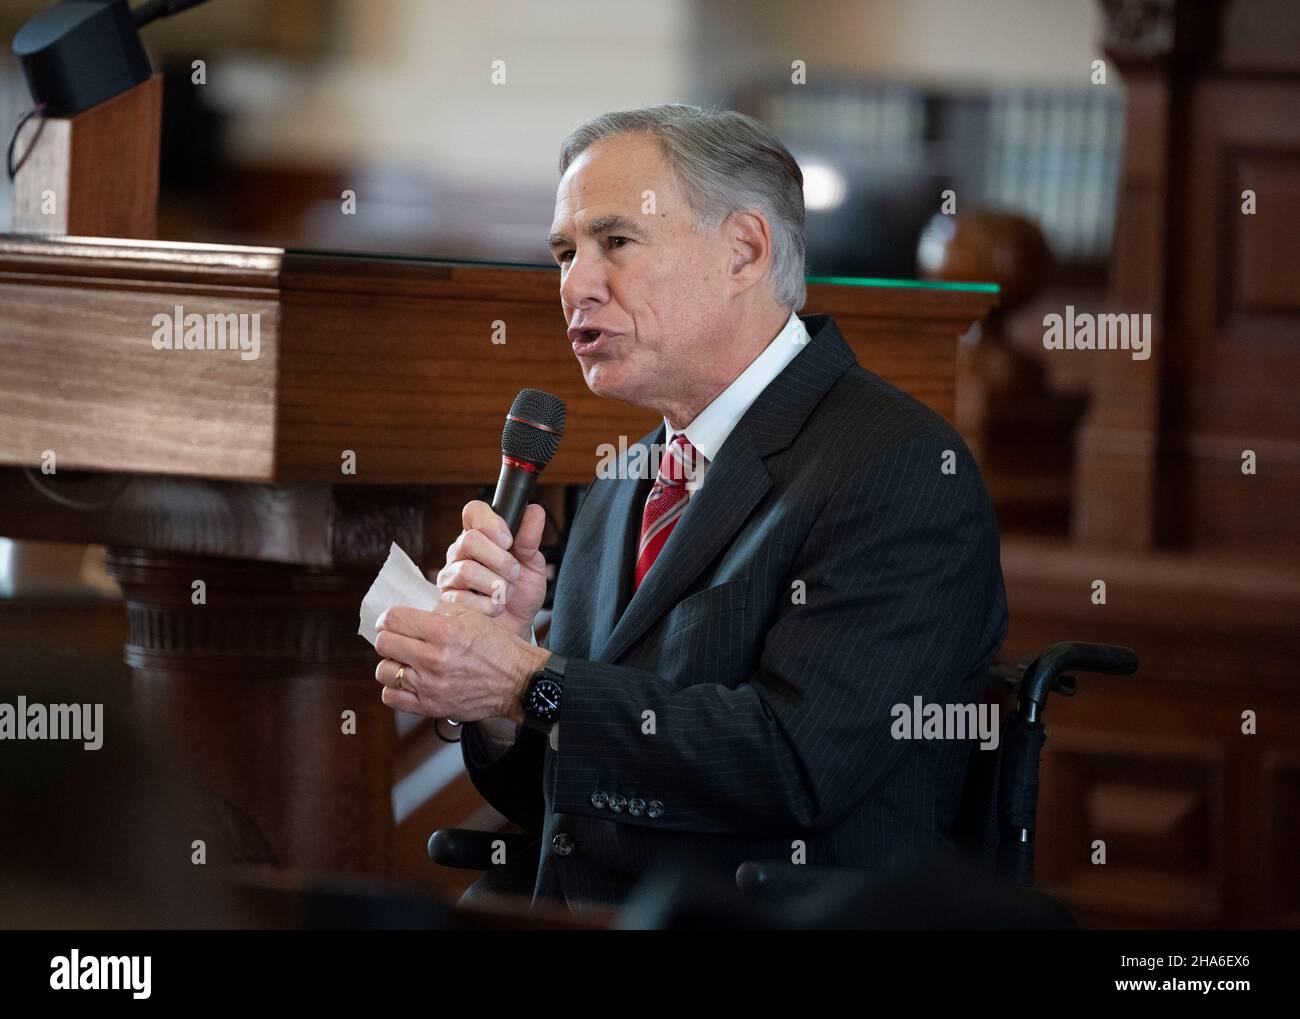 Austin Texas USA, Dec. 10 2021: Texas Gov. Greg Abbott speaks at an investiture ceremony for new Texas Supreme Court Justice Rebecca A. Huddle at the Texas Capitol. Huddle has been on the court for a year but her formal swearing-in ceremony was delayed due to COVID protocols. Credit: Bob Daemmrich/Alamy Live News Stock Photo